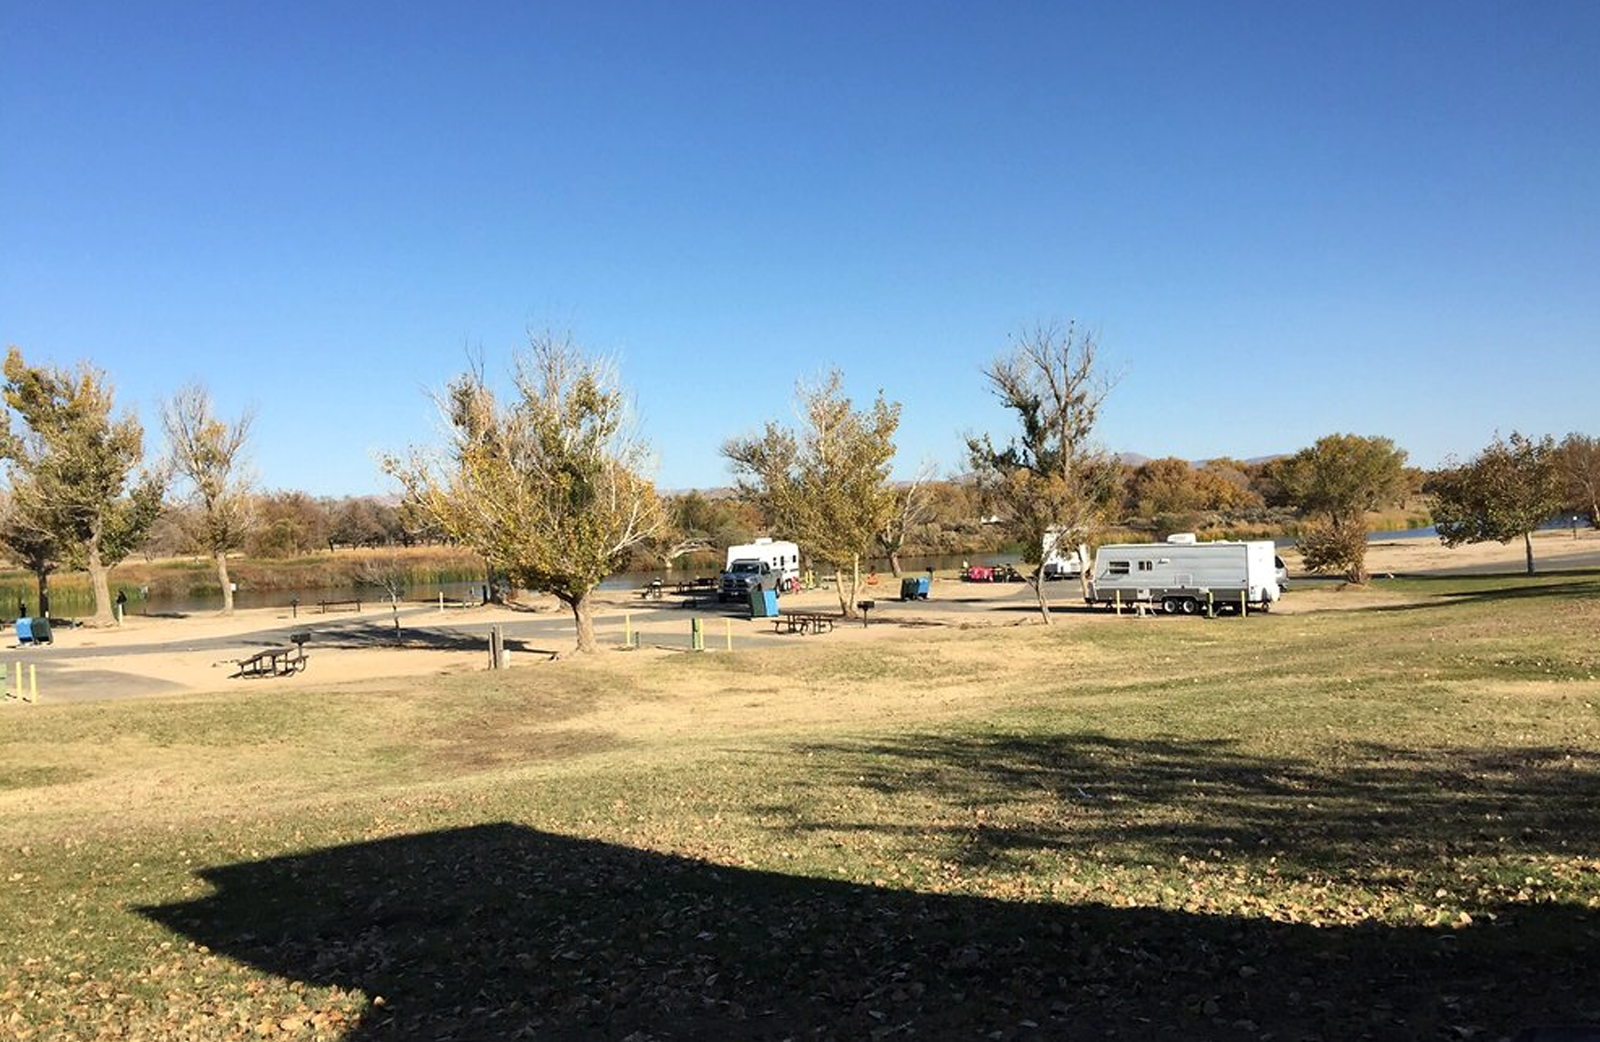 A large grass area with RVs parked.